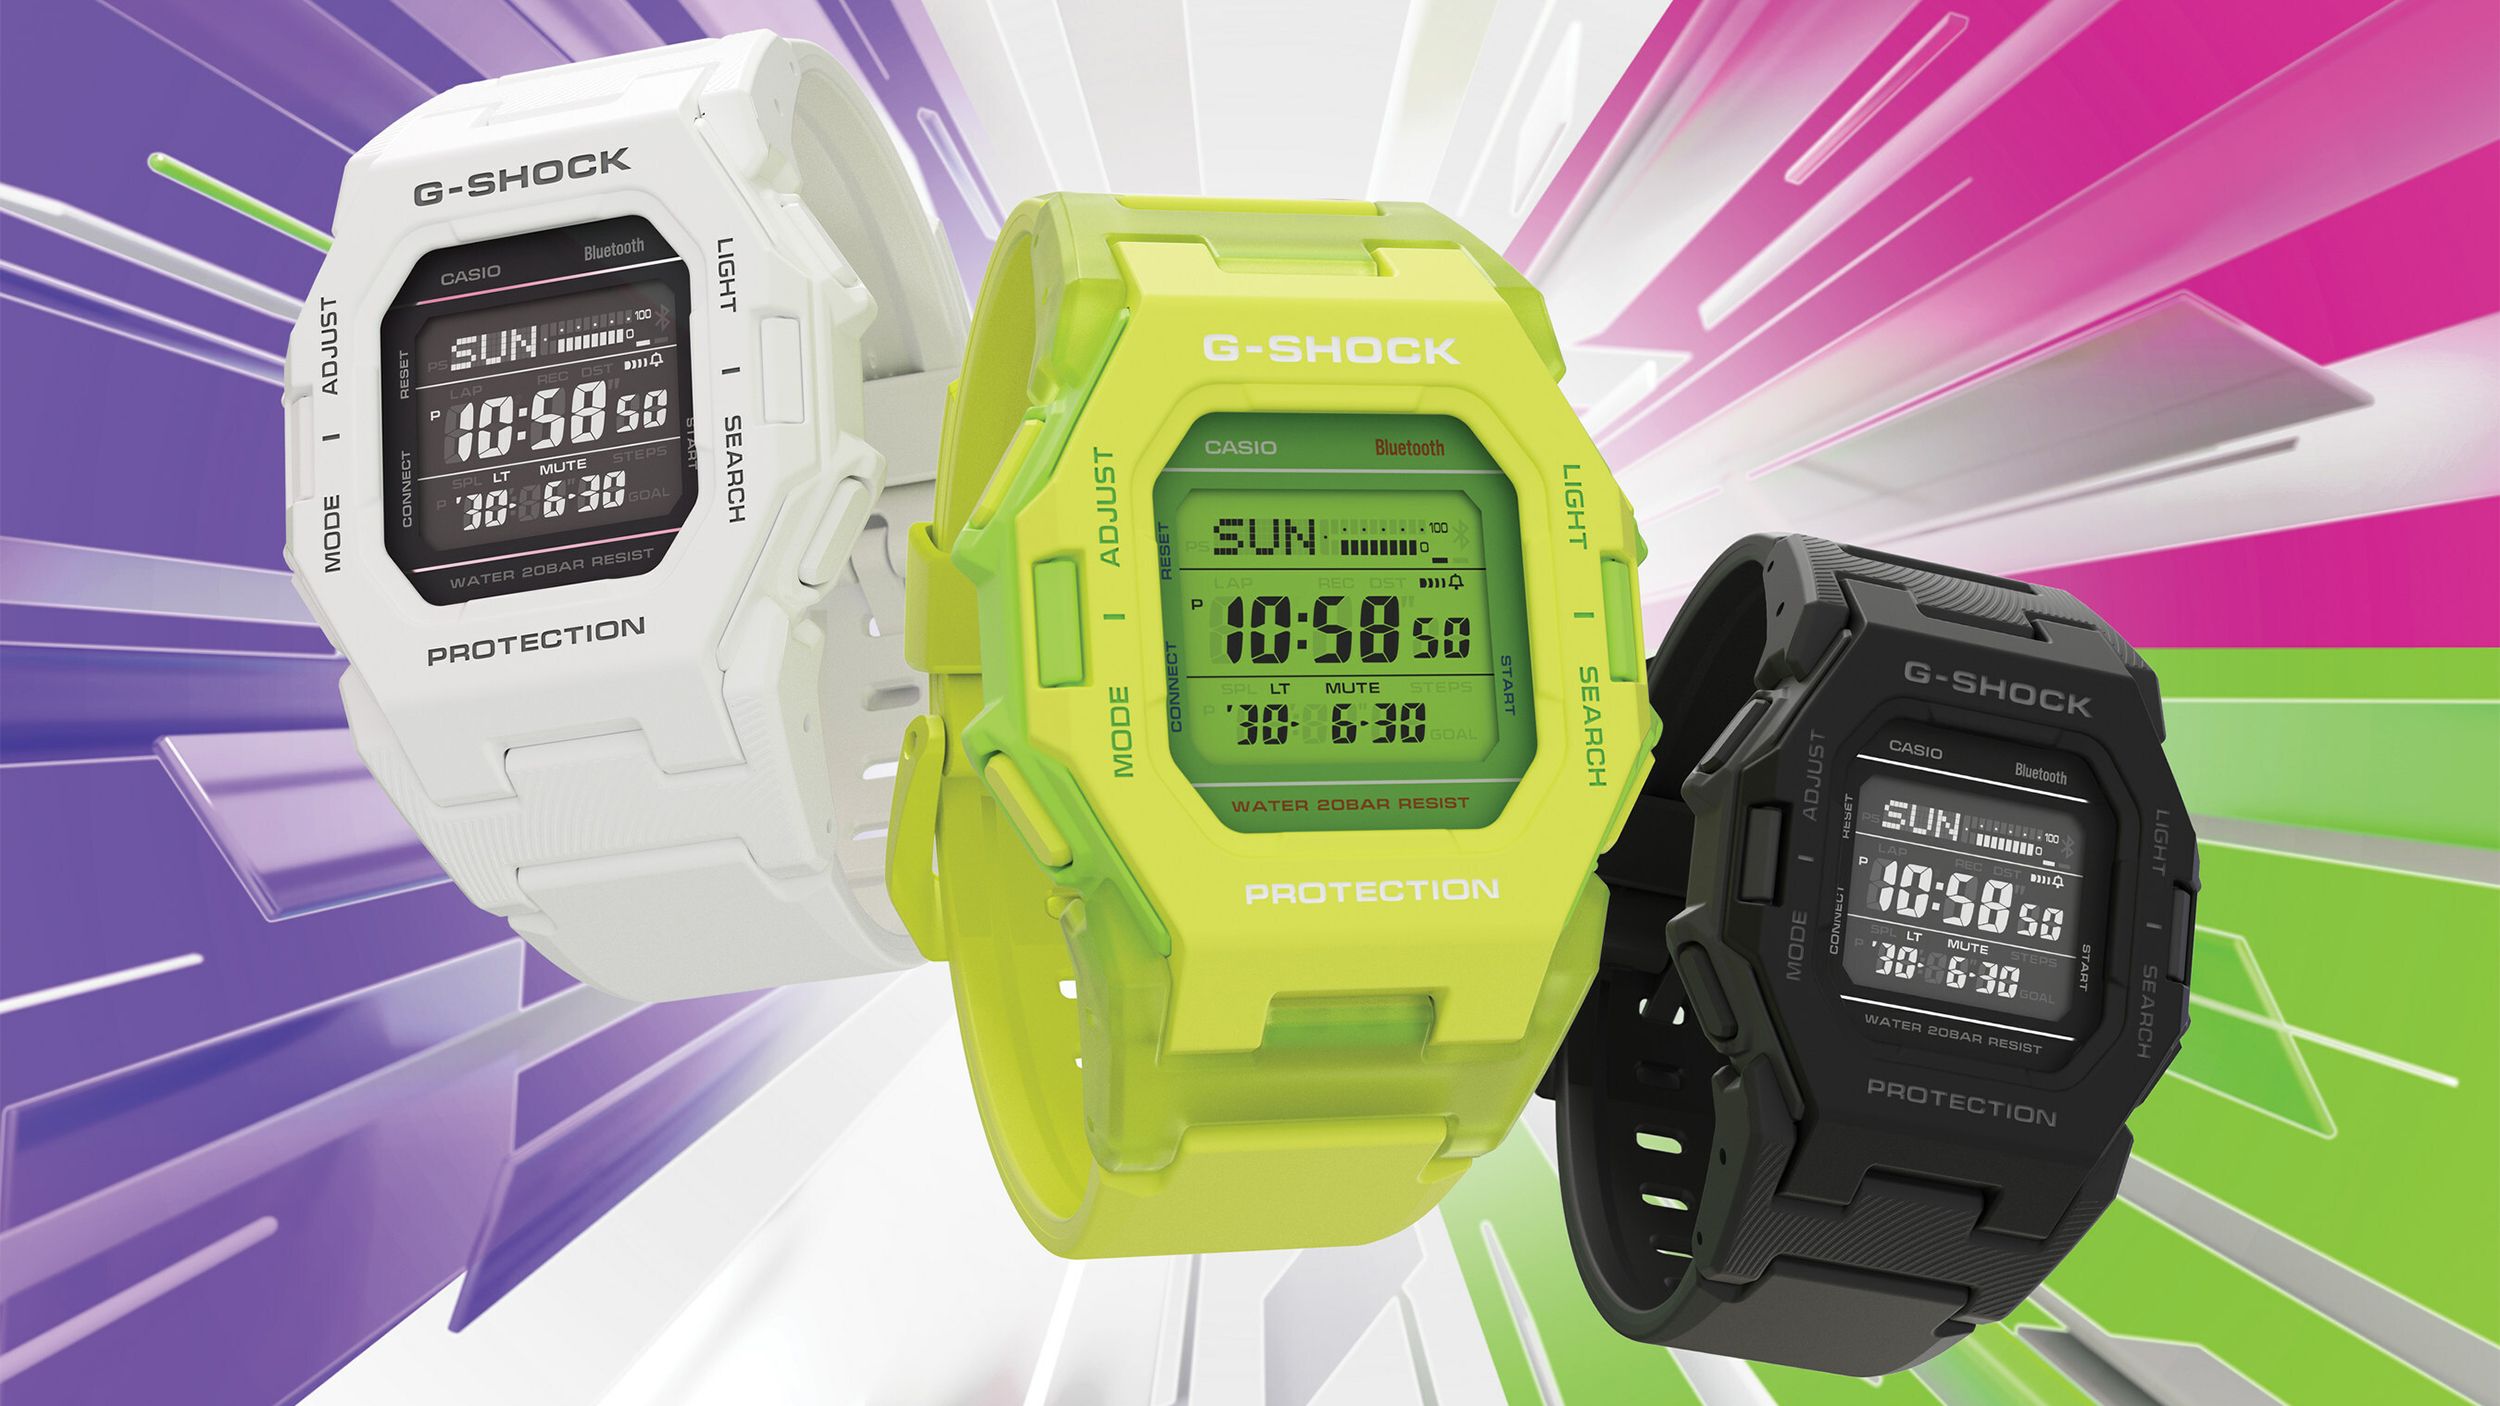 Casios newest G-Shock watch is a colorful step counter